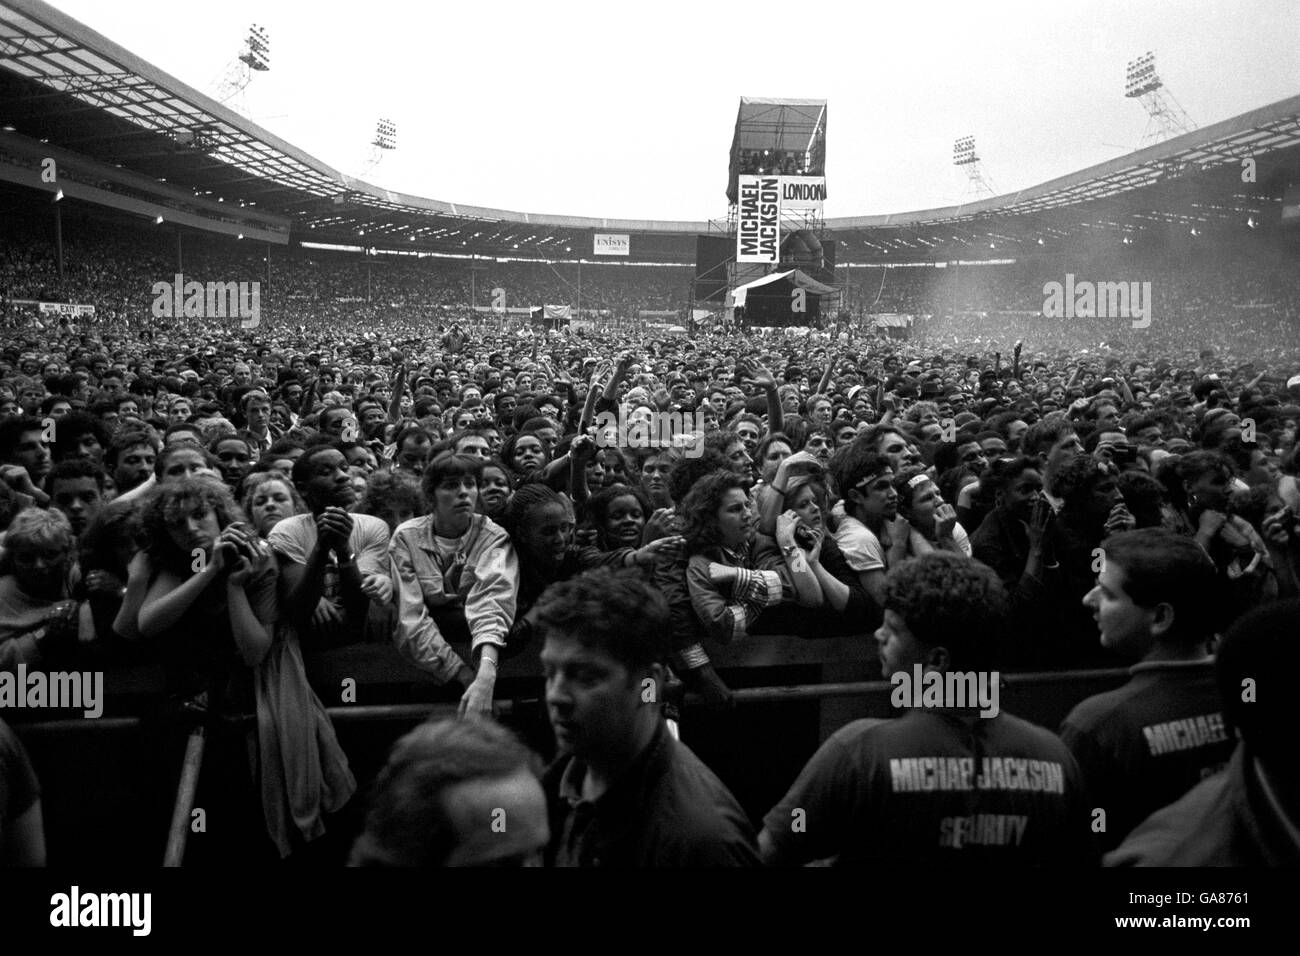 Michael Jackson rocks a packed Wembley Stadium, as he kicks off the British leg of his sell-out world tour. Stock Photo